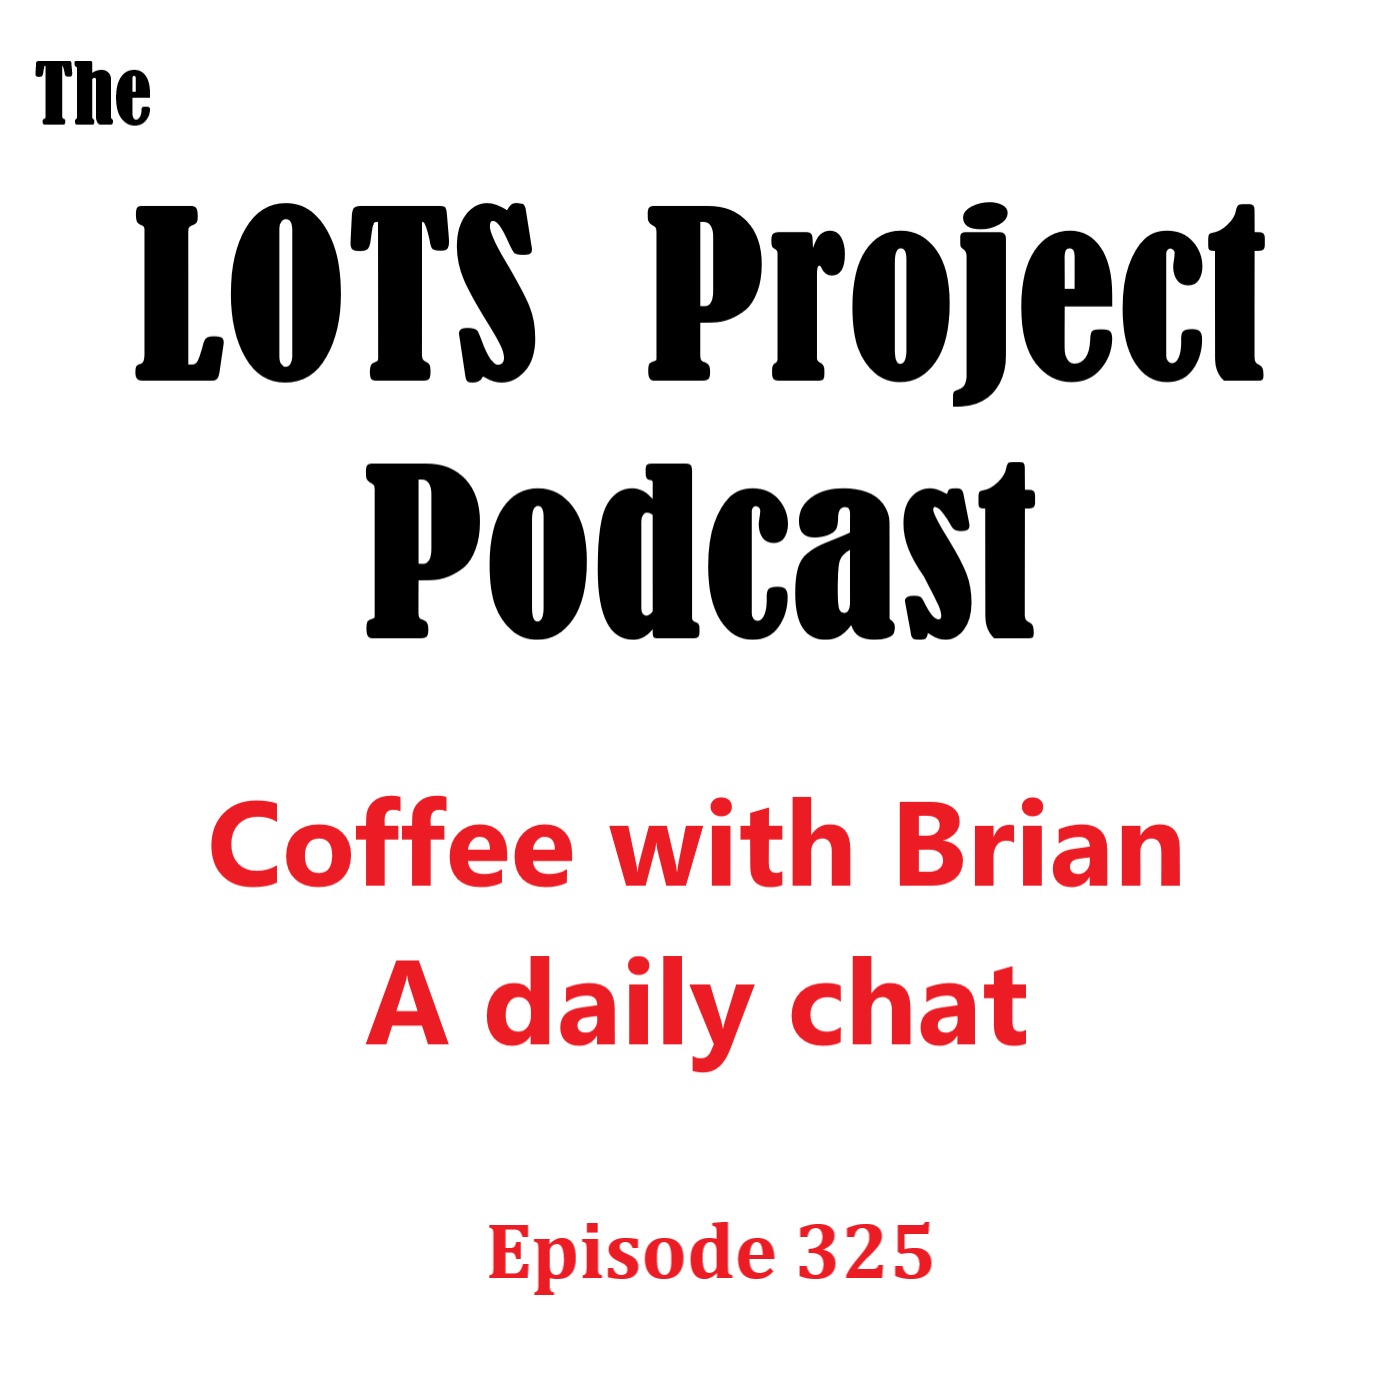 Episode 325 Coffee with Brian, A Daily Morning Chat #podcast #daily #nomad #coffee